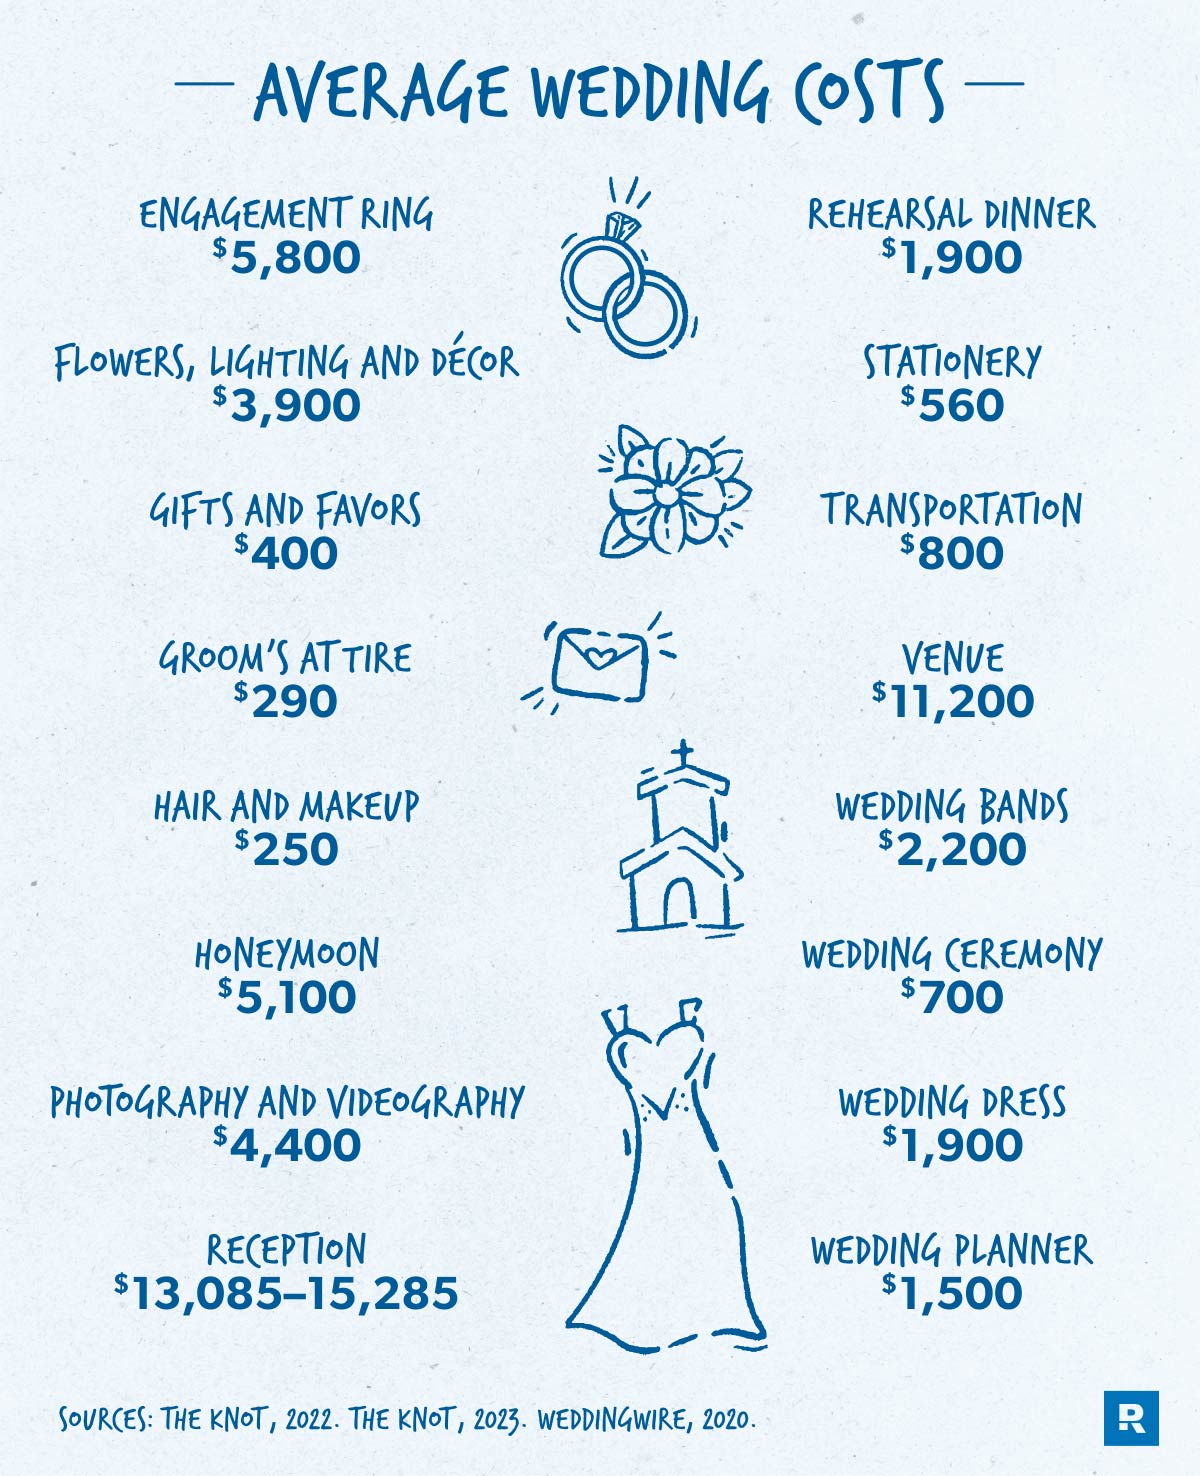 How much does the average wedding cost